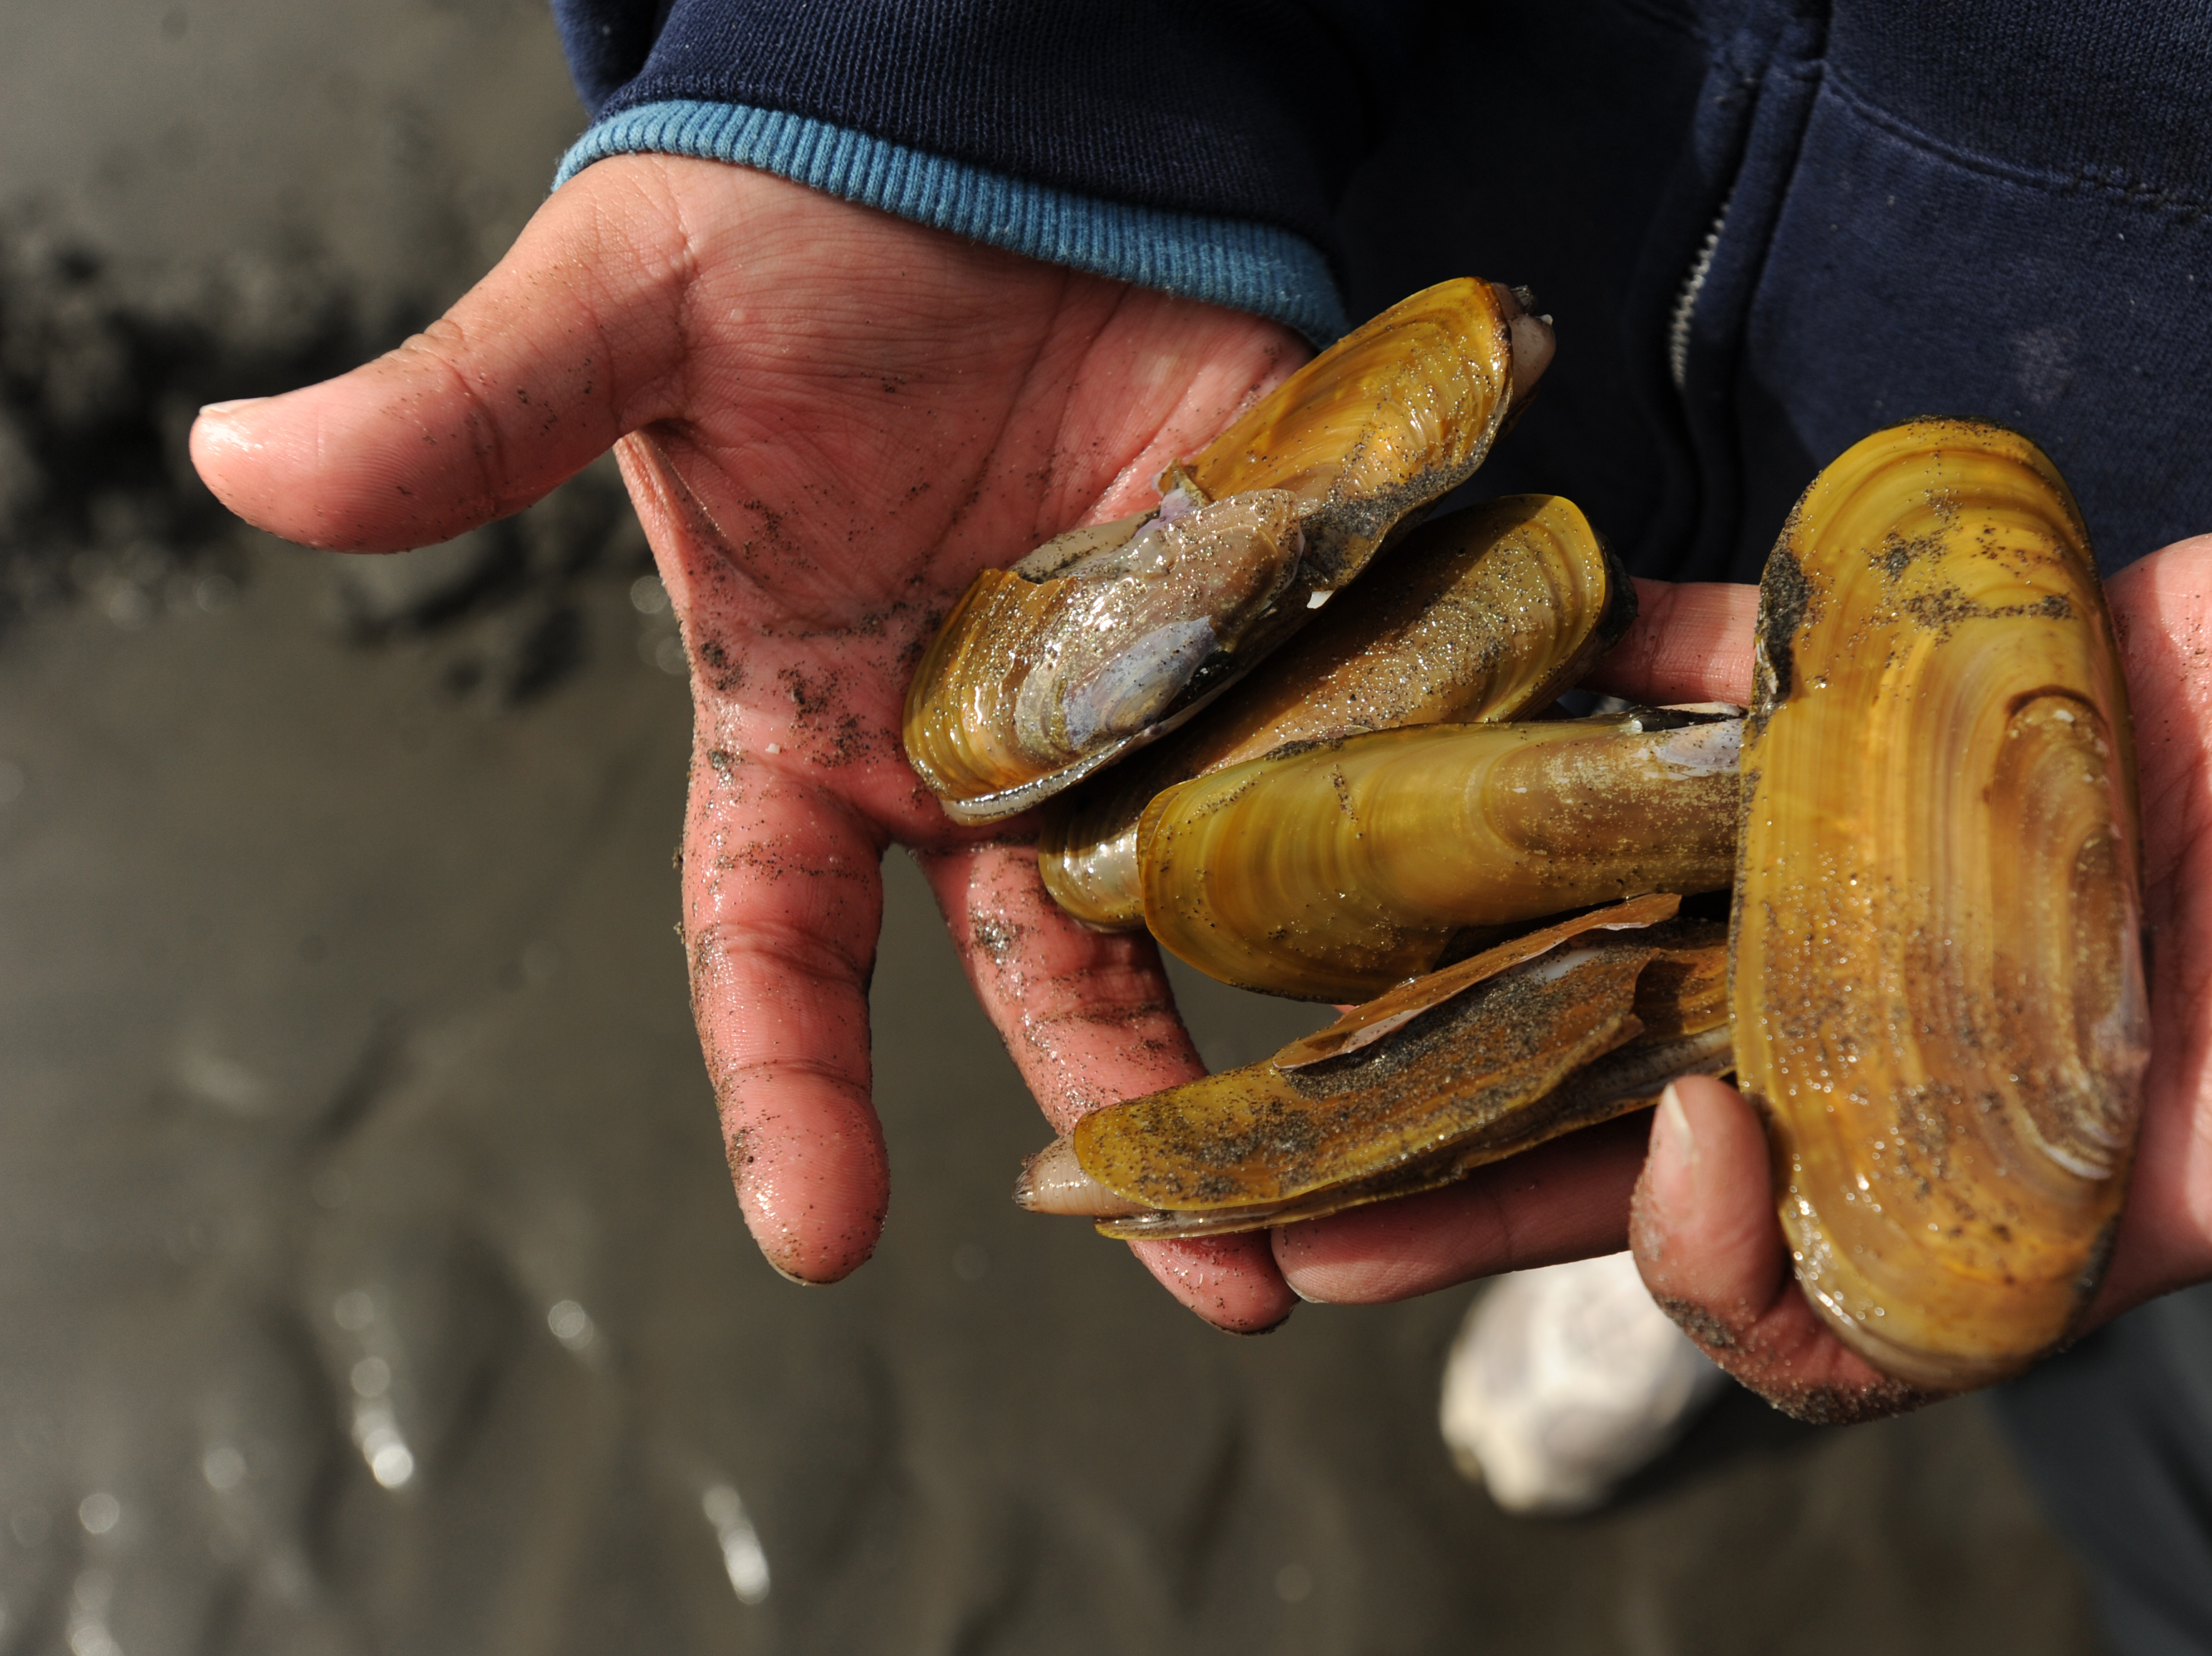 Diggers could soon return to East Cook Inlet for razor clam harvest -  Anchorage Daily News